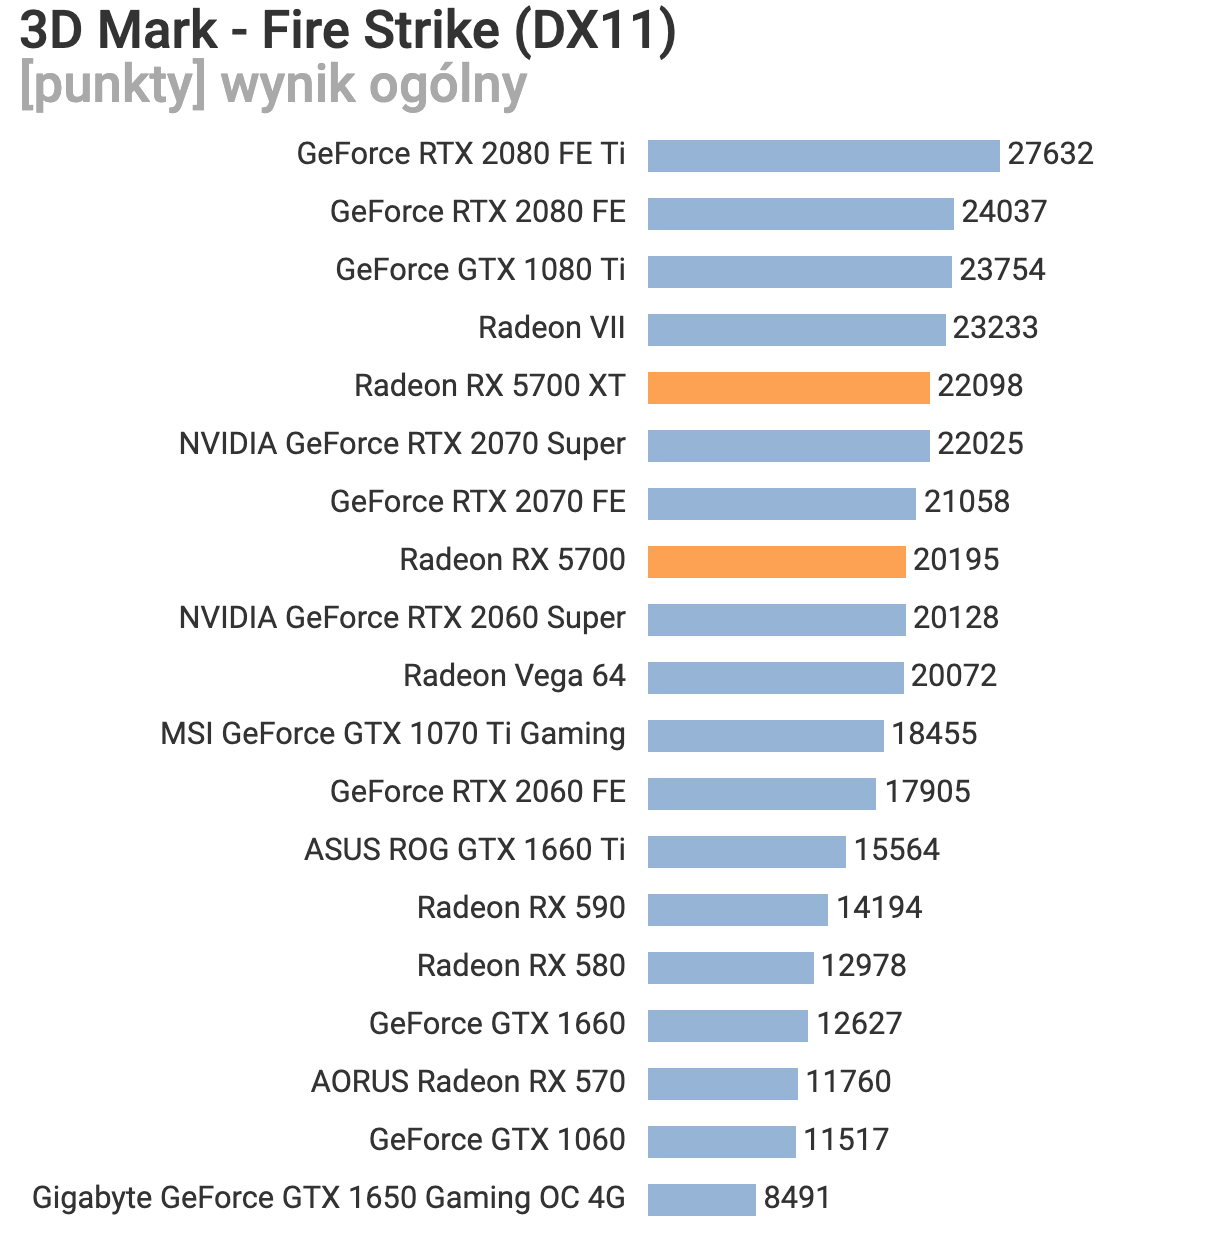 Media asset in full size related to 3dfxzone.it news item entitled as follows: Leaked Benchmarks: AMD Radeon RX 5700 Series vs NVIDIA GeForce RTX 20XX | Image Name: news29757_AMD-Radeon-5700-Series-Benchmark_1.png